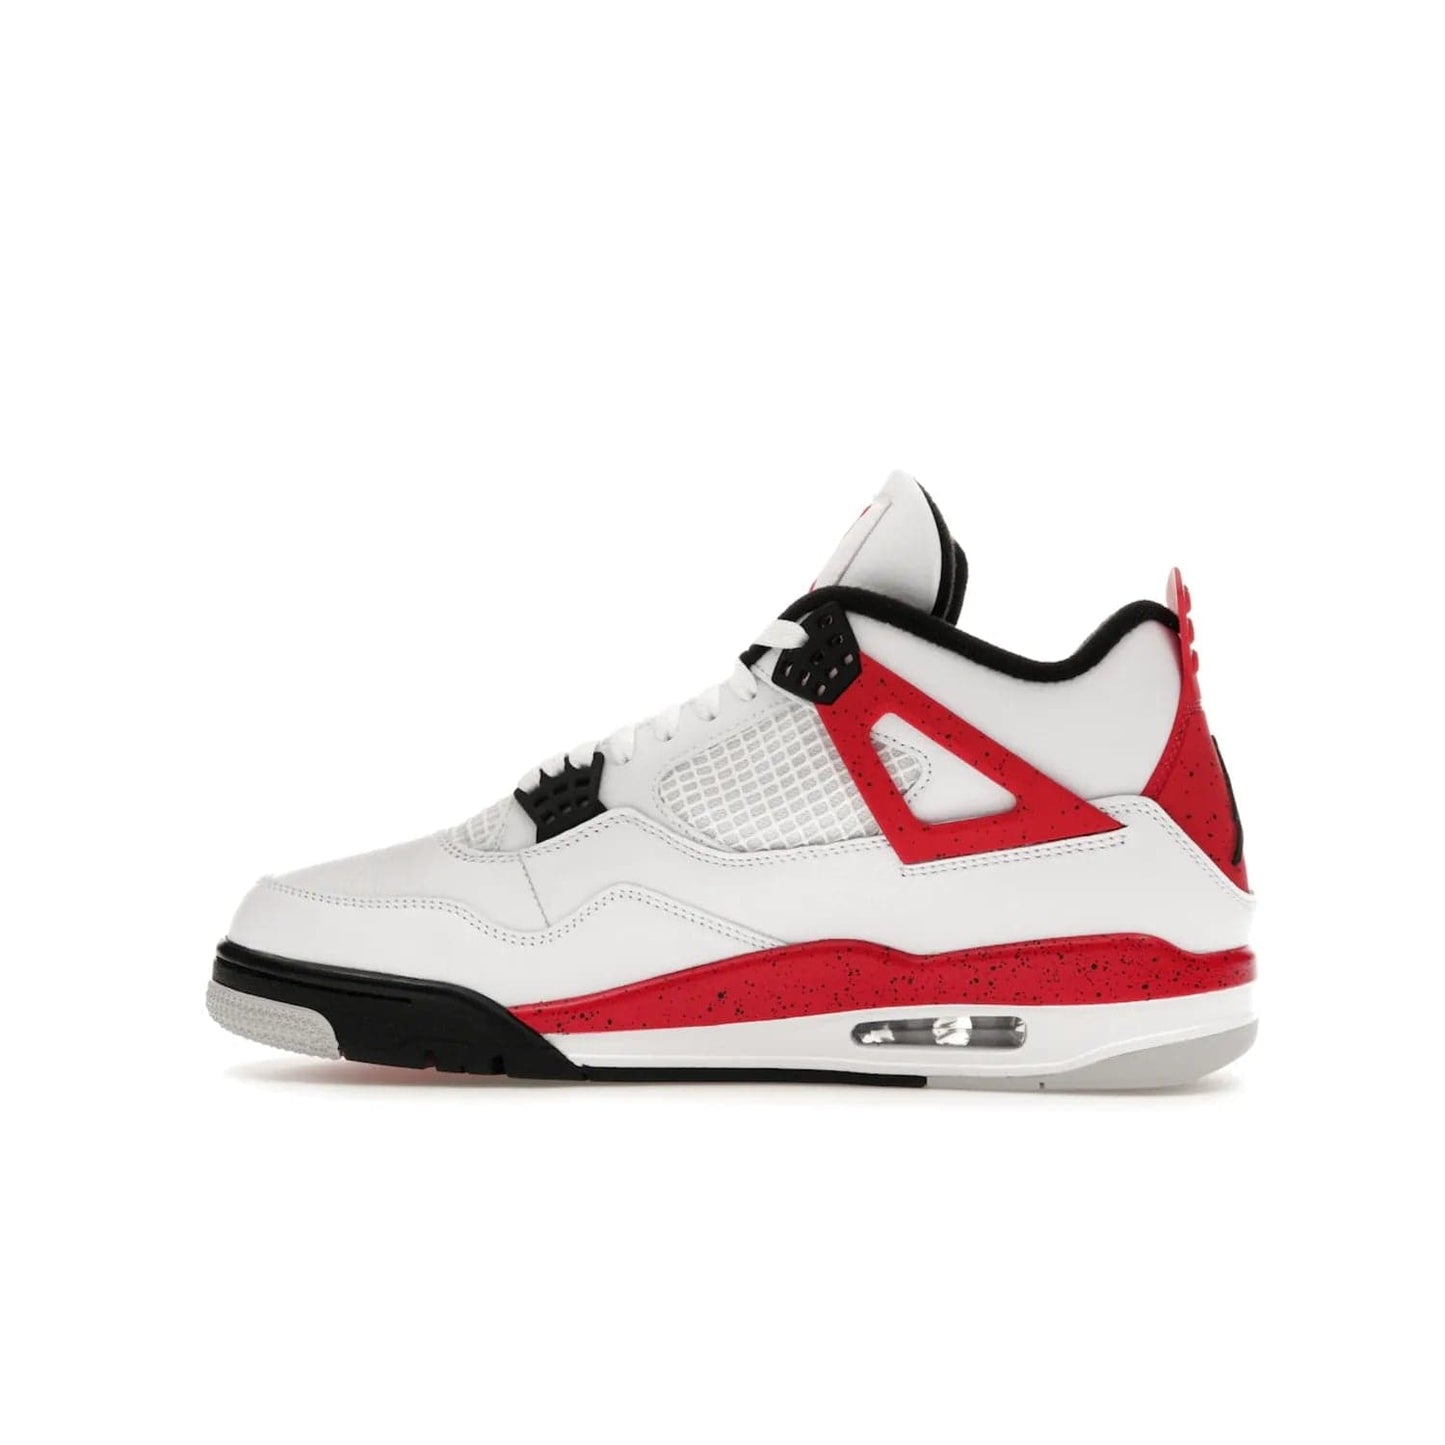 Jordan 4 Retro Red Cement - Image 20 - Only at www.BallersClubKickz.com - Iconic Jordan silhouette with a unique twist. White premium leather uppers with fire red and black detailing. Black, white, and fire red midsole with mesh detailing and Jumpman logo. Jordan 4 Retro Red Cement released with premium price.